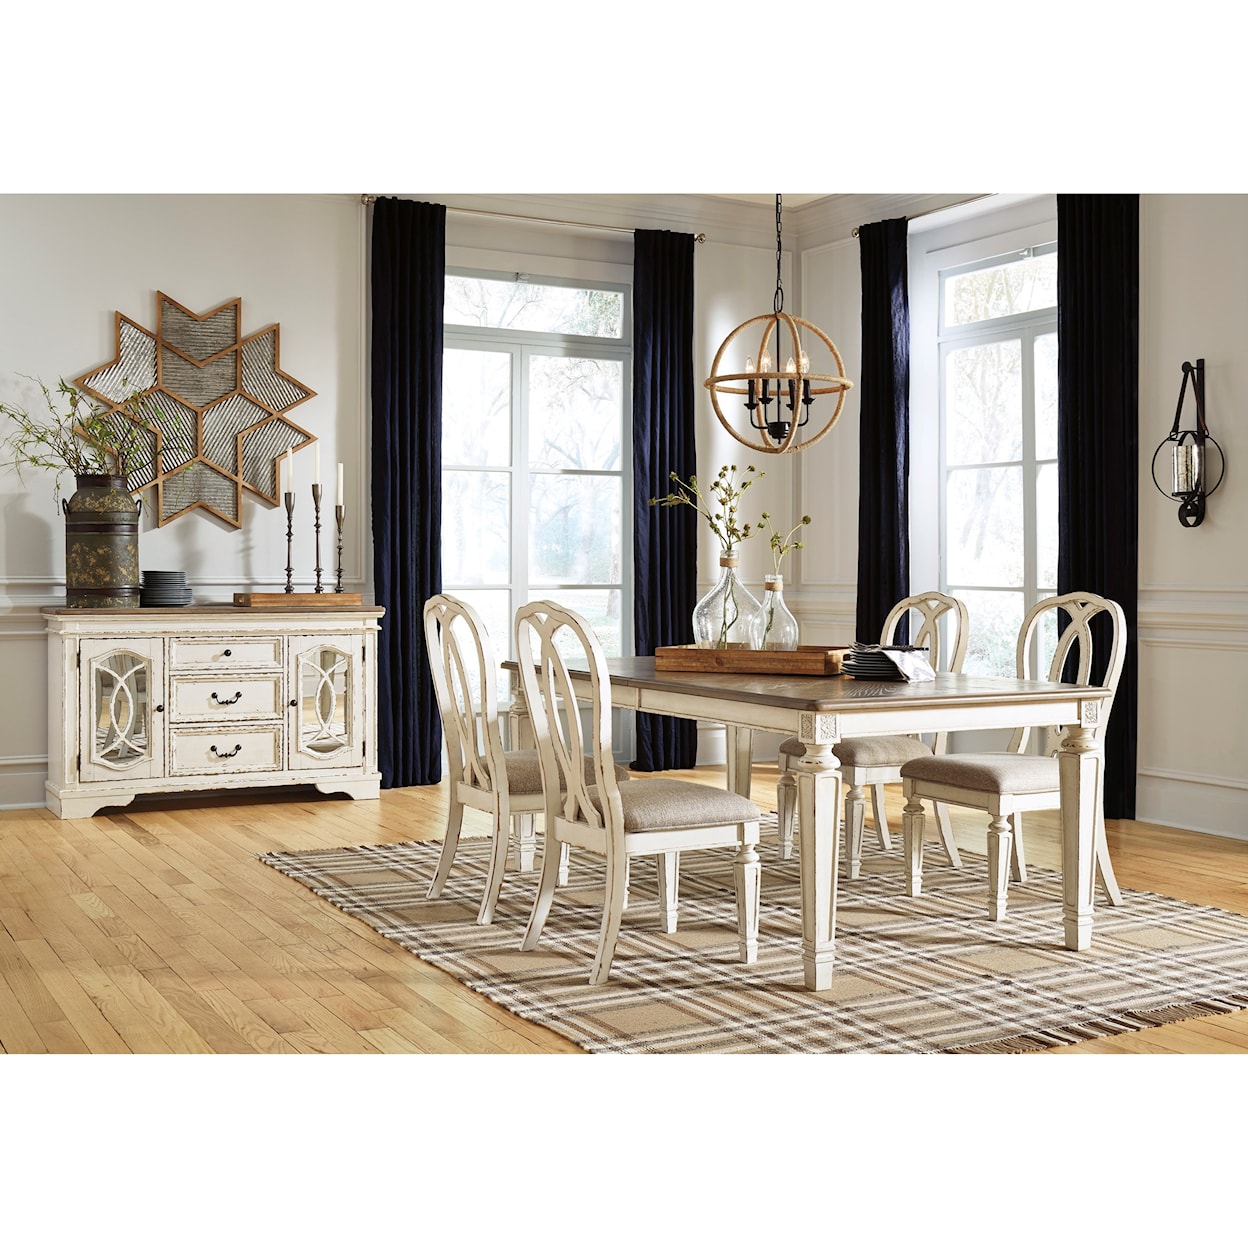 Ashley Furniture Signature Design Realyn Casual Dining Room Group